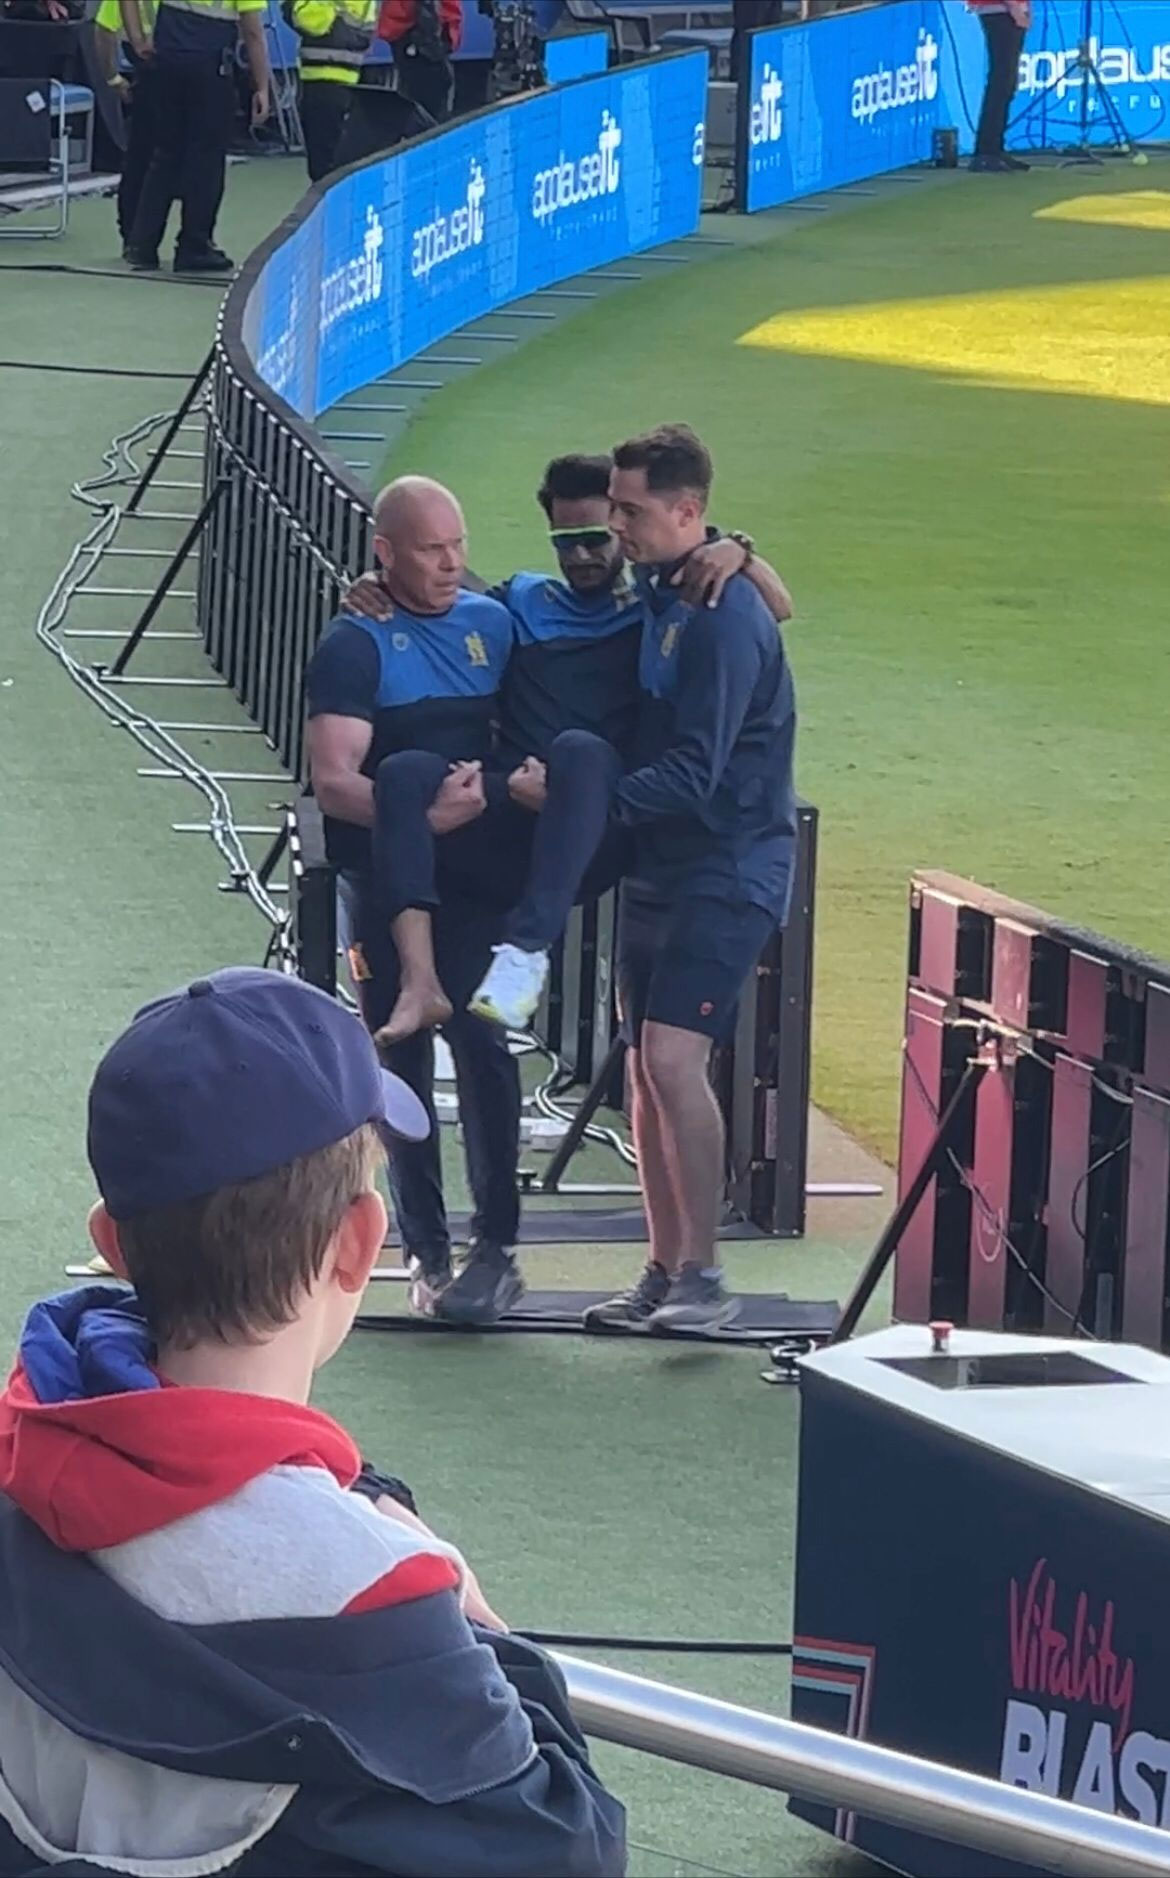 The Birmingham Bears staff assisting Hasan Ali off the ground following the injury.